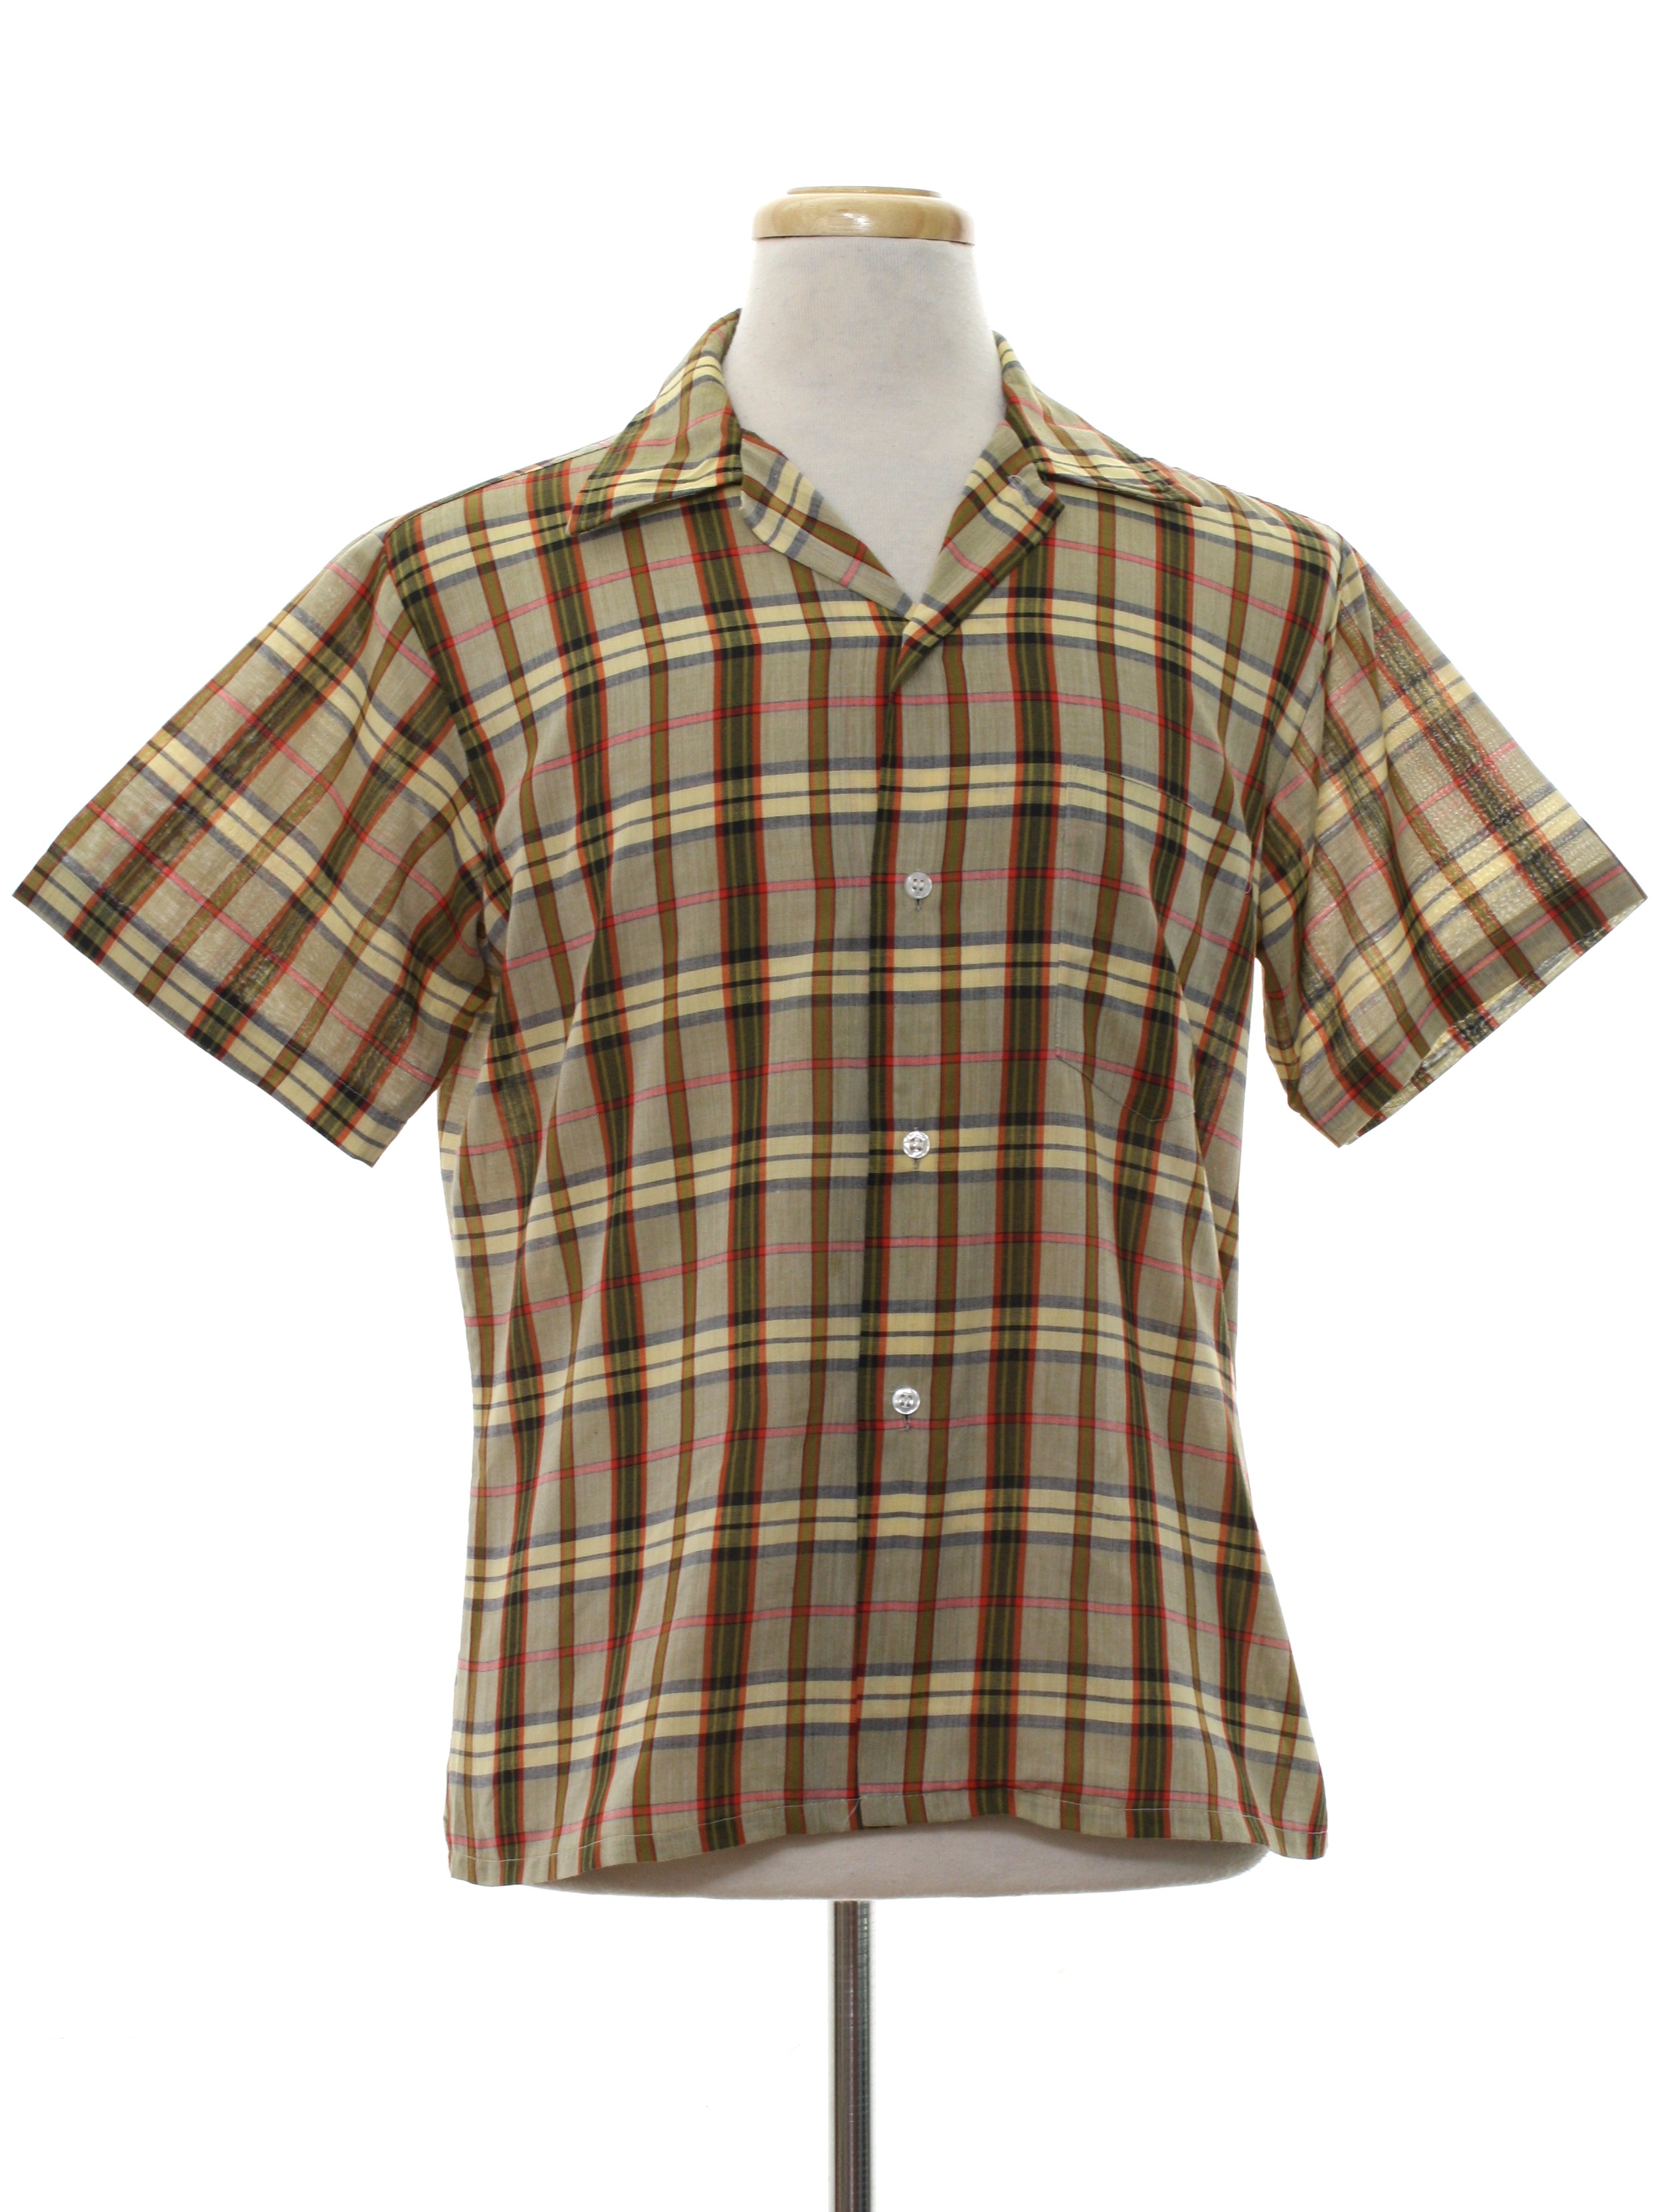 Vintage 1960's Shirt: Early 60s -Invincible Permanent Press- Mens sand ...